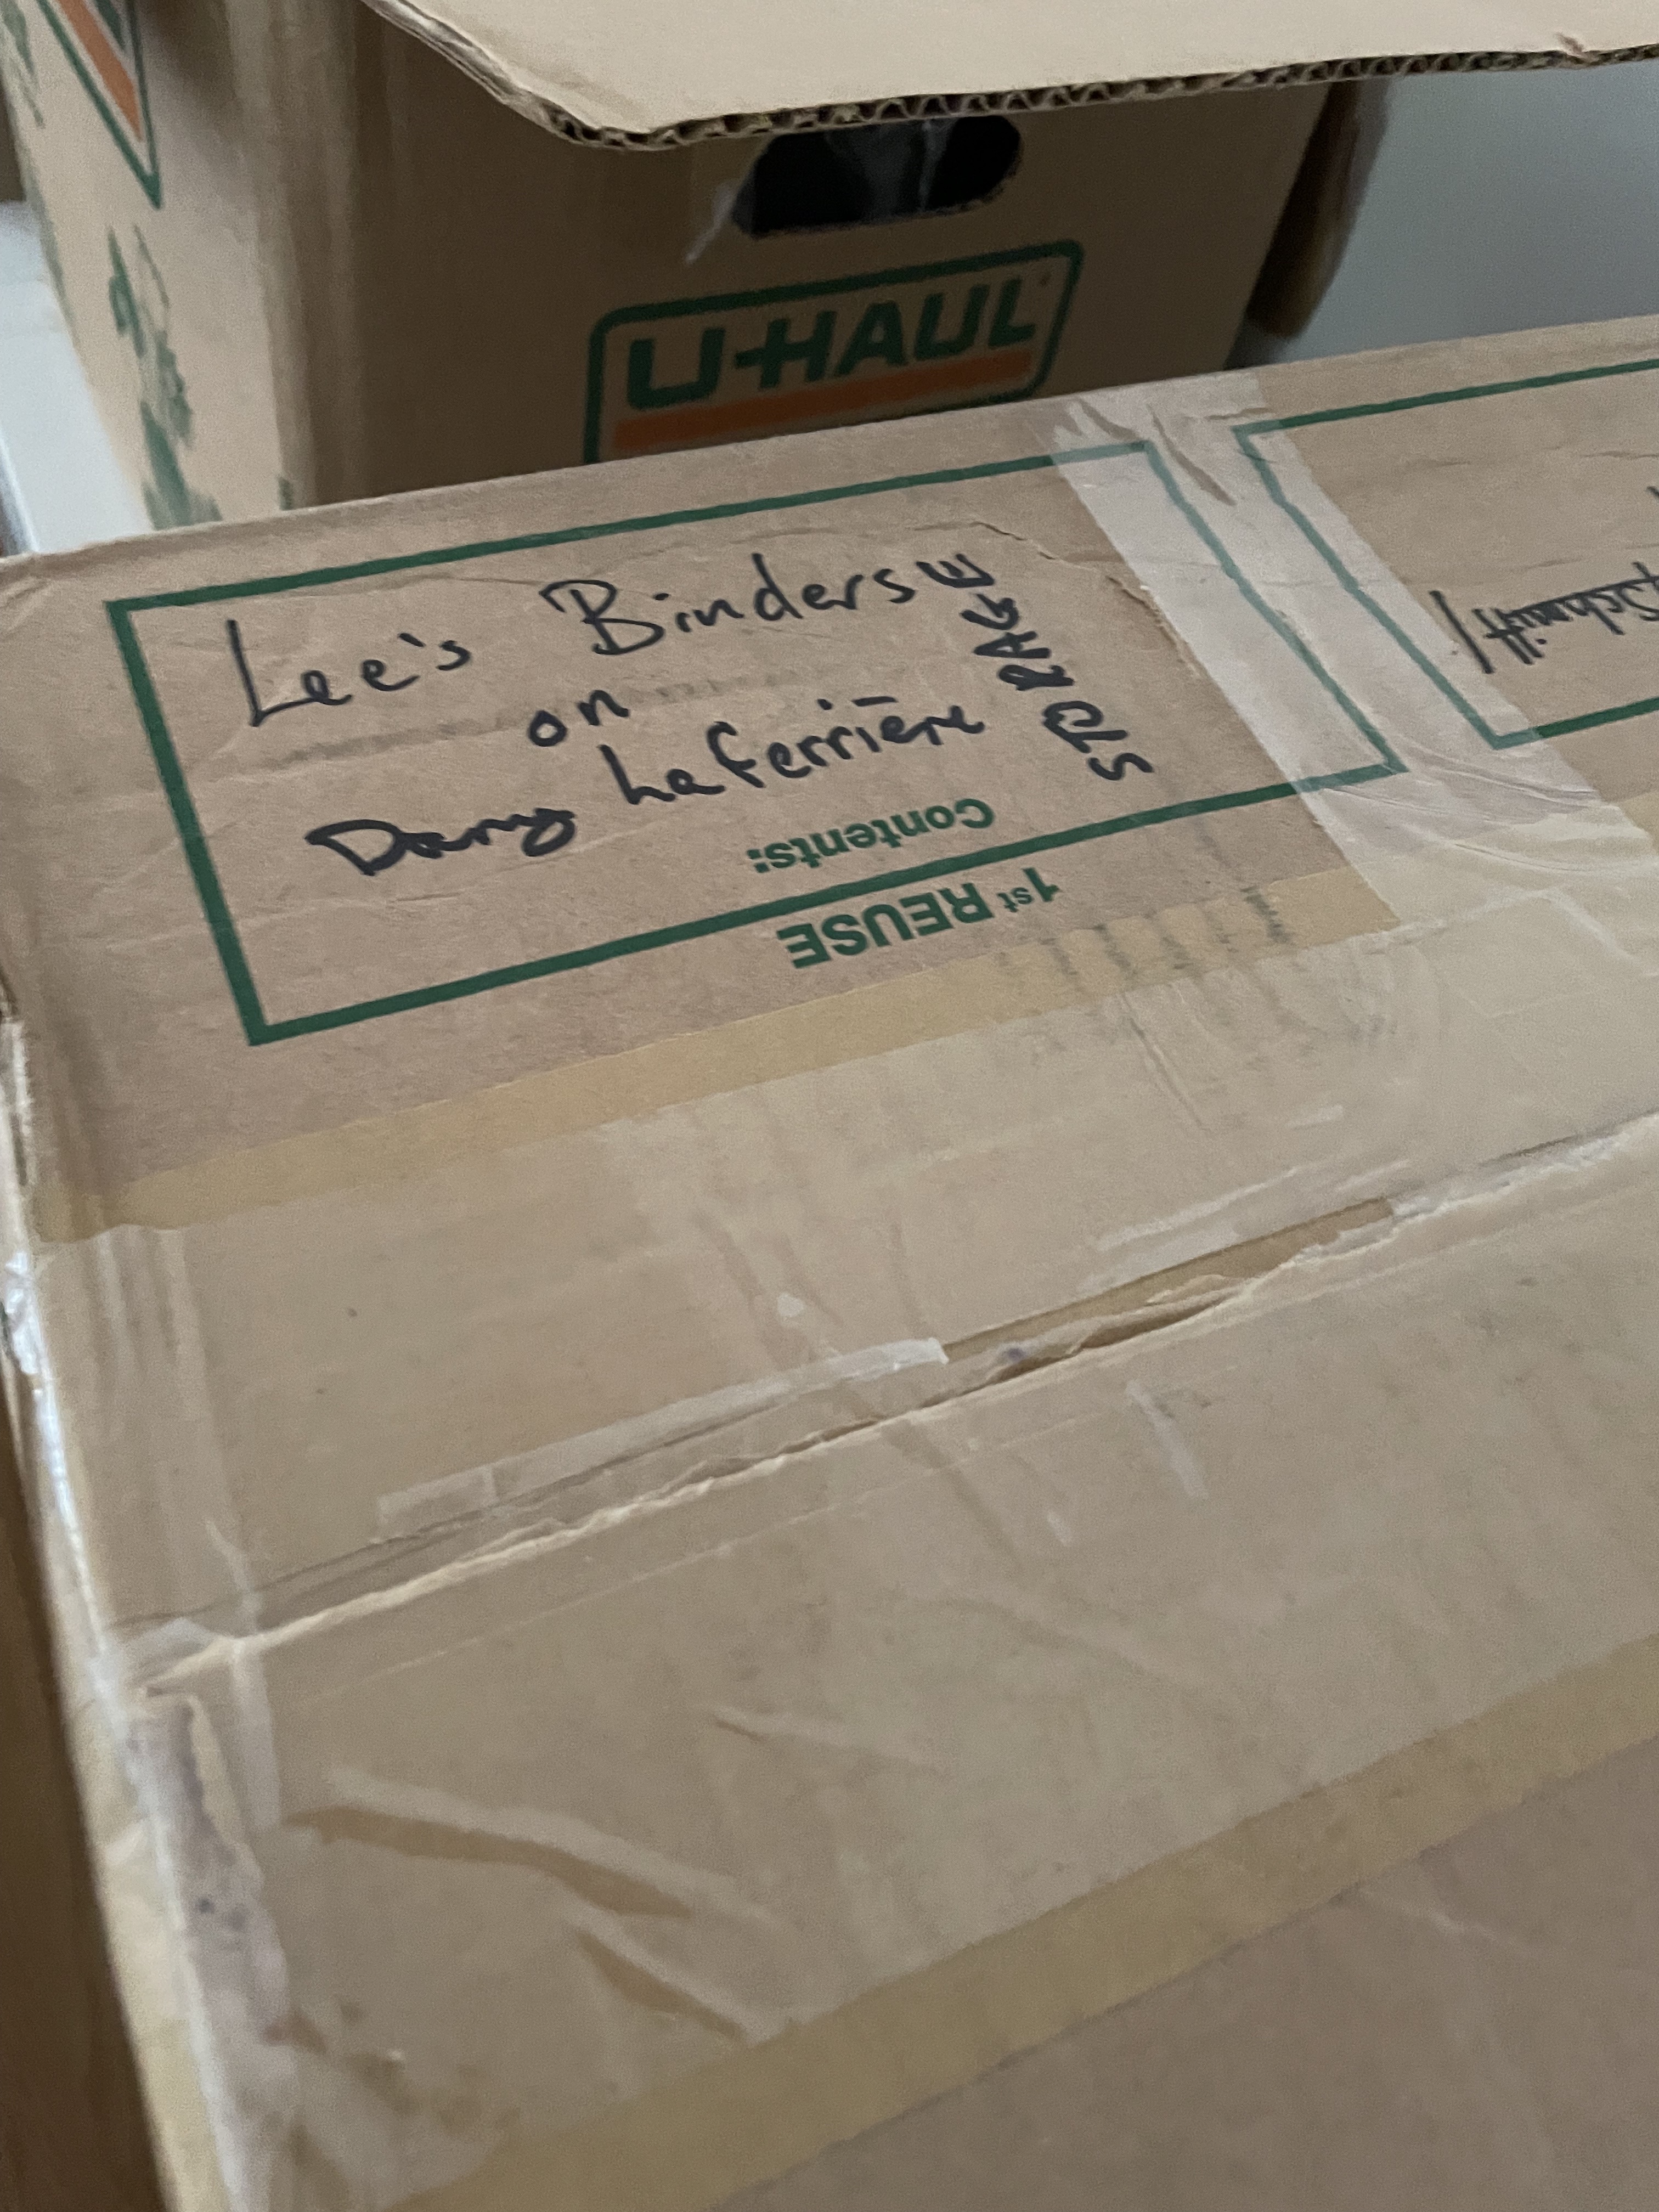 Box that says Lee's binders on Dany Laferrière